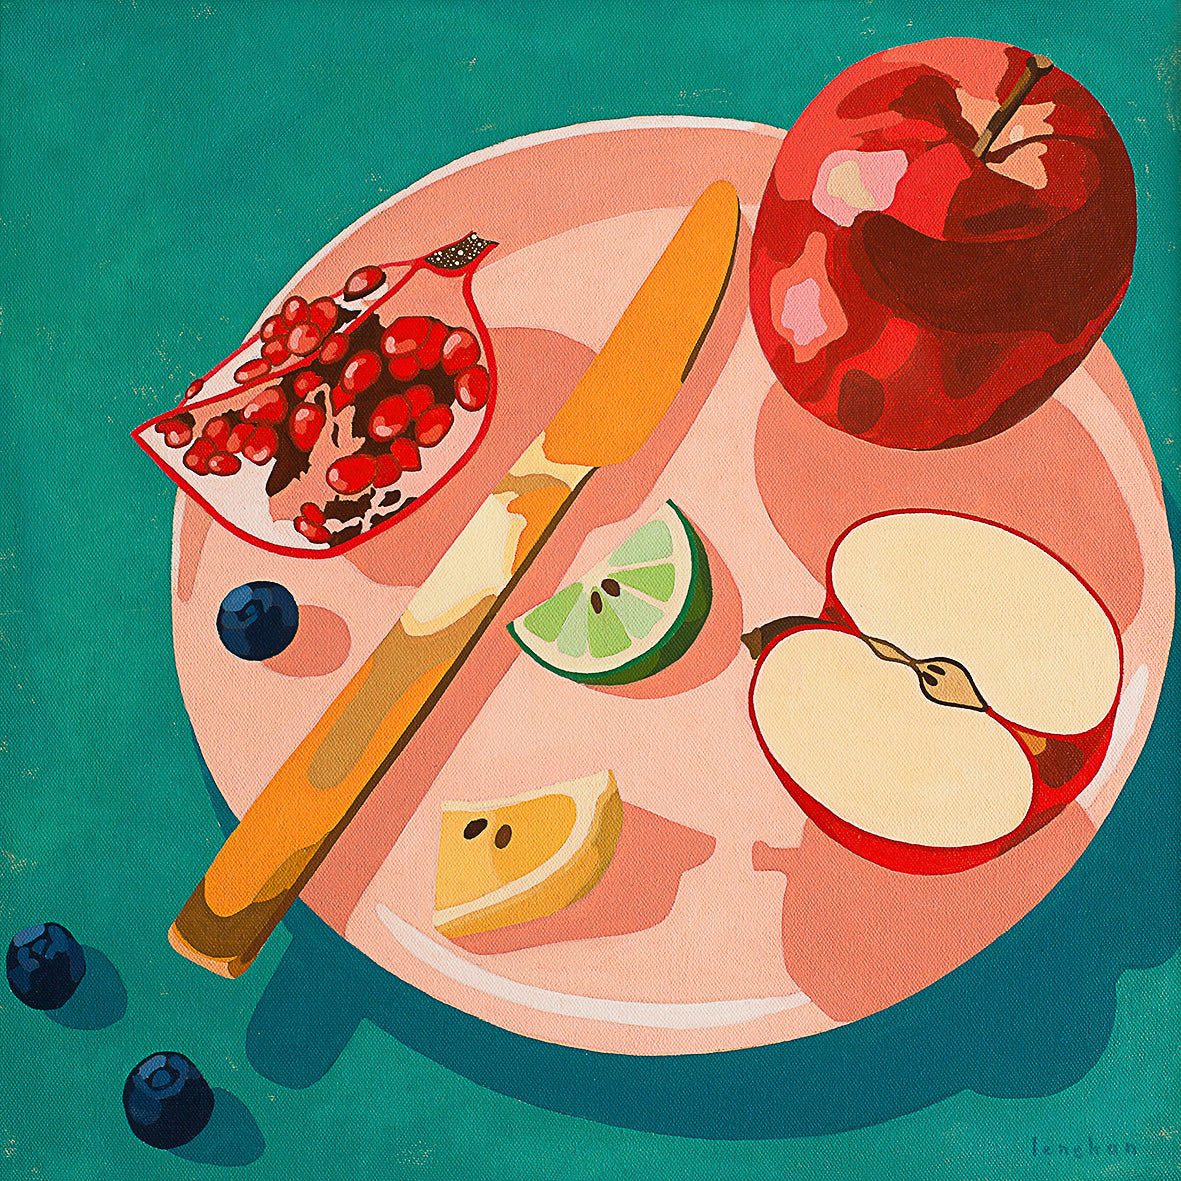 Yani Lenehan sells fine art prints for kitchen and dining spaces that add a splash of colour